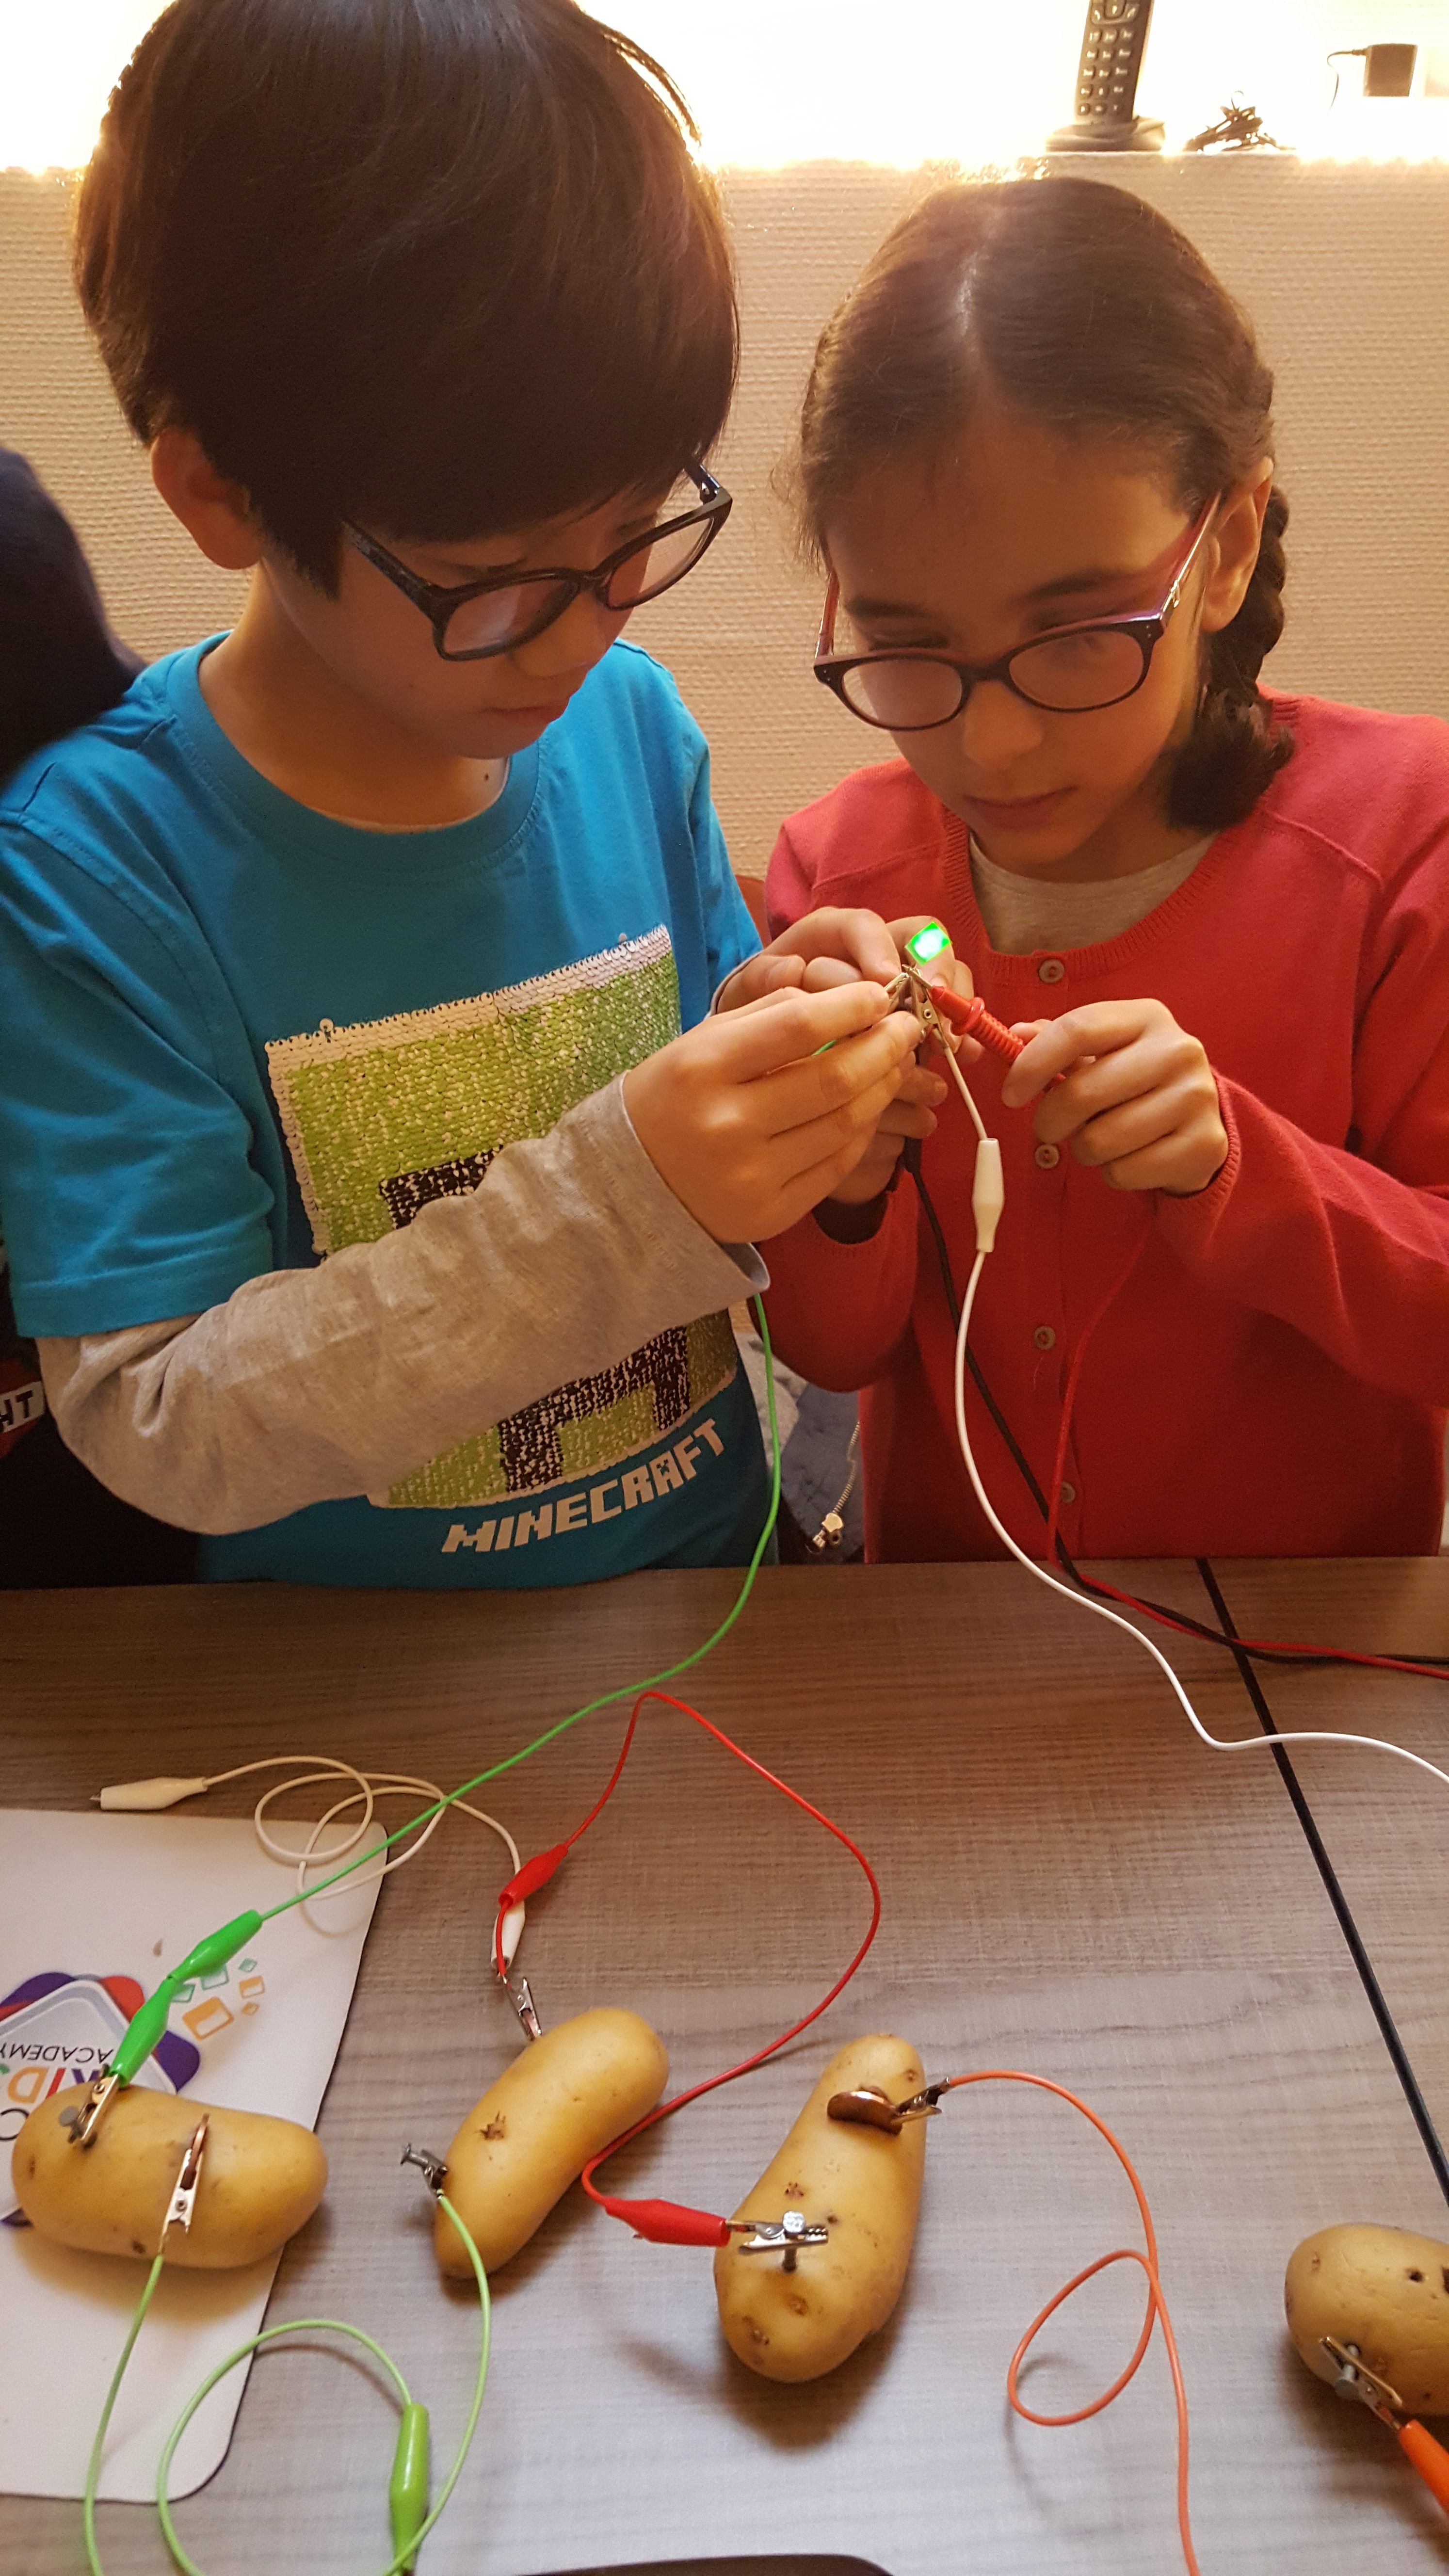 Ateliers hebdos 7-9 ans Electronique patate